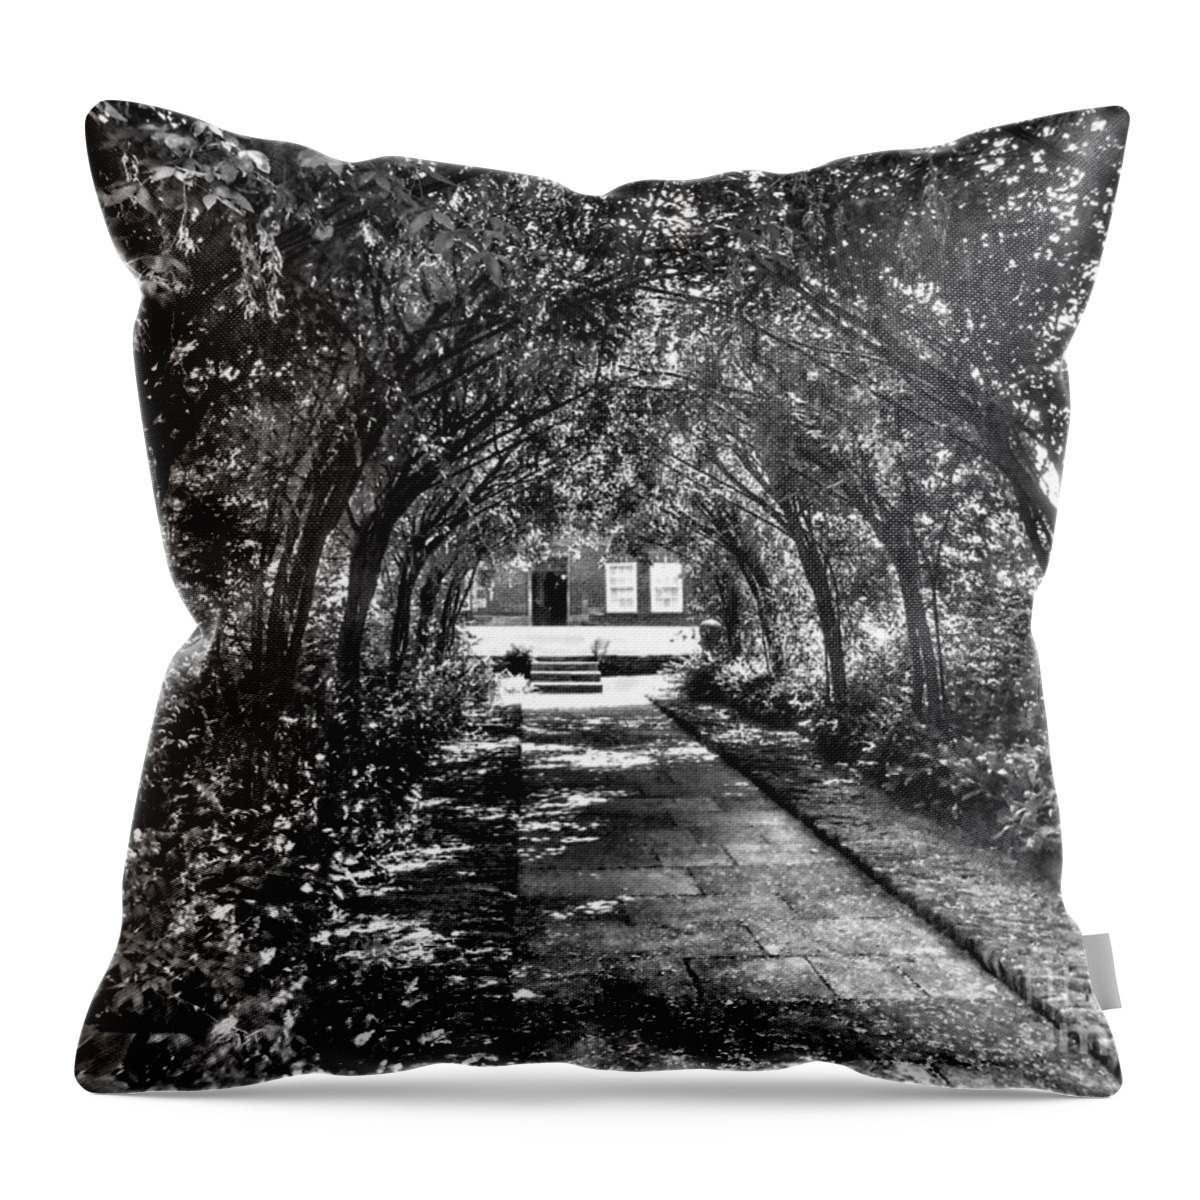 Wedding Arch Throw Pillow featuring the photograph The Wedding Arch In Black and White by Joan-Violet Stretch